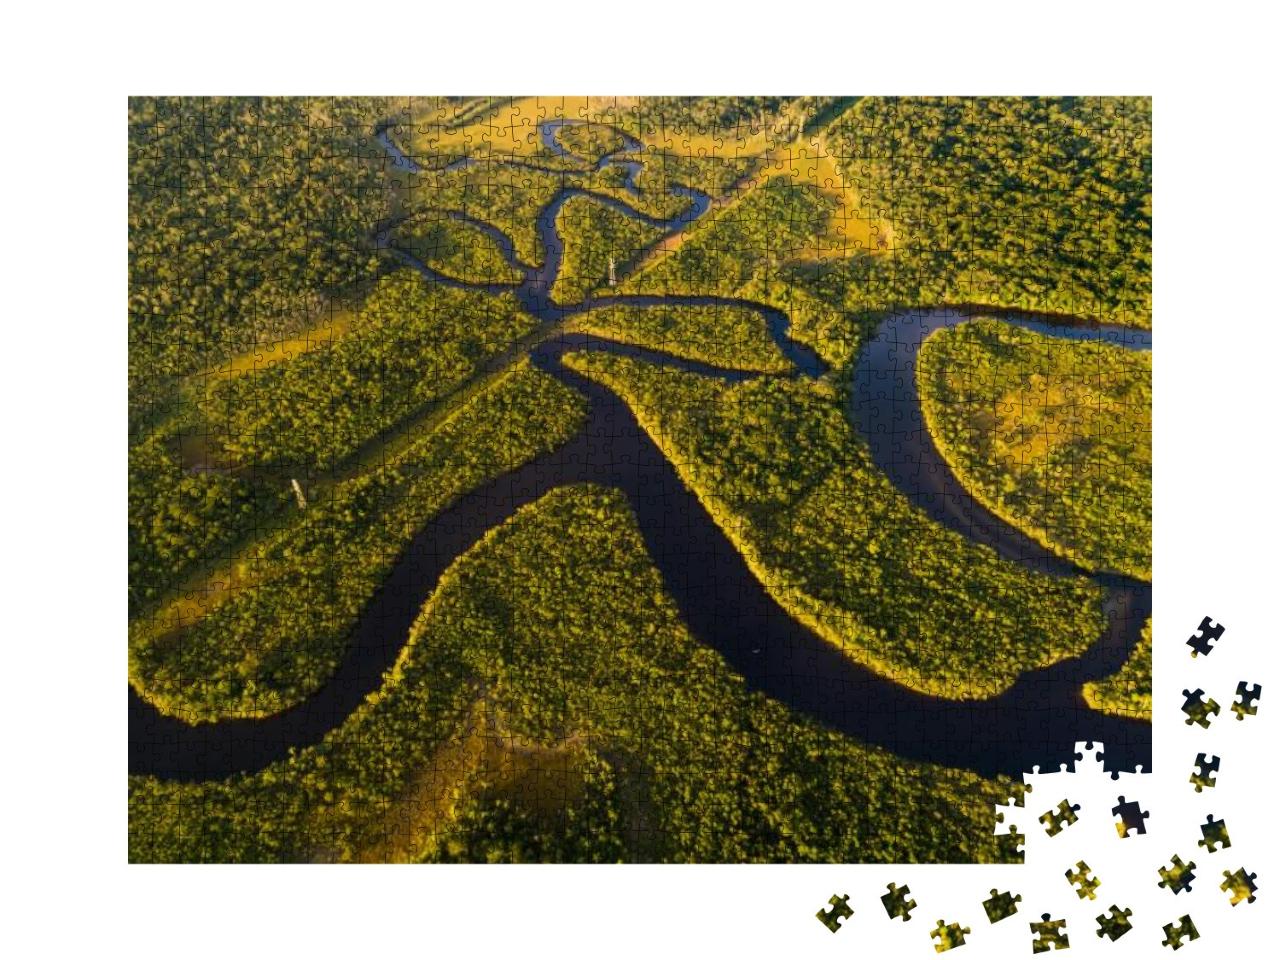 Amazon Rainforest in Brazil... Jigsaw Puzzle with 1000 pieces